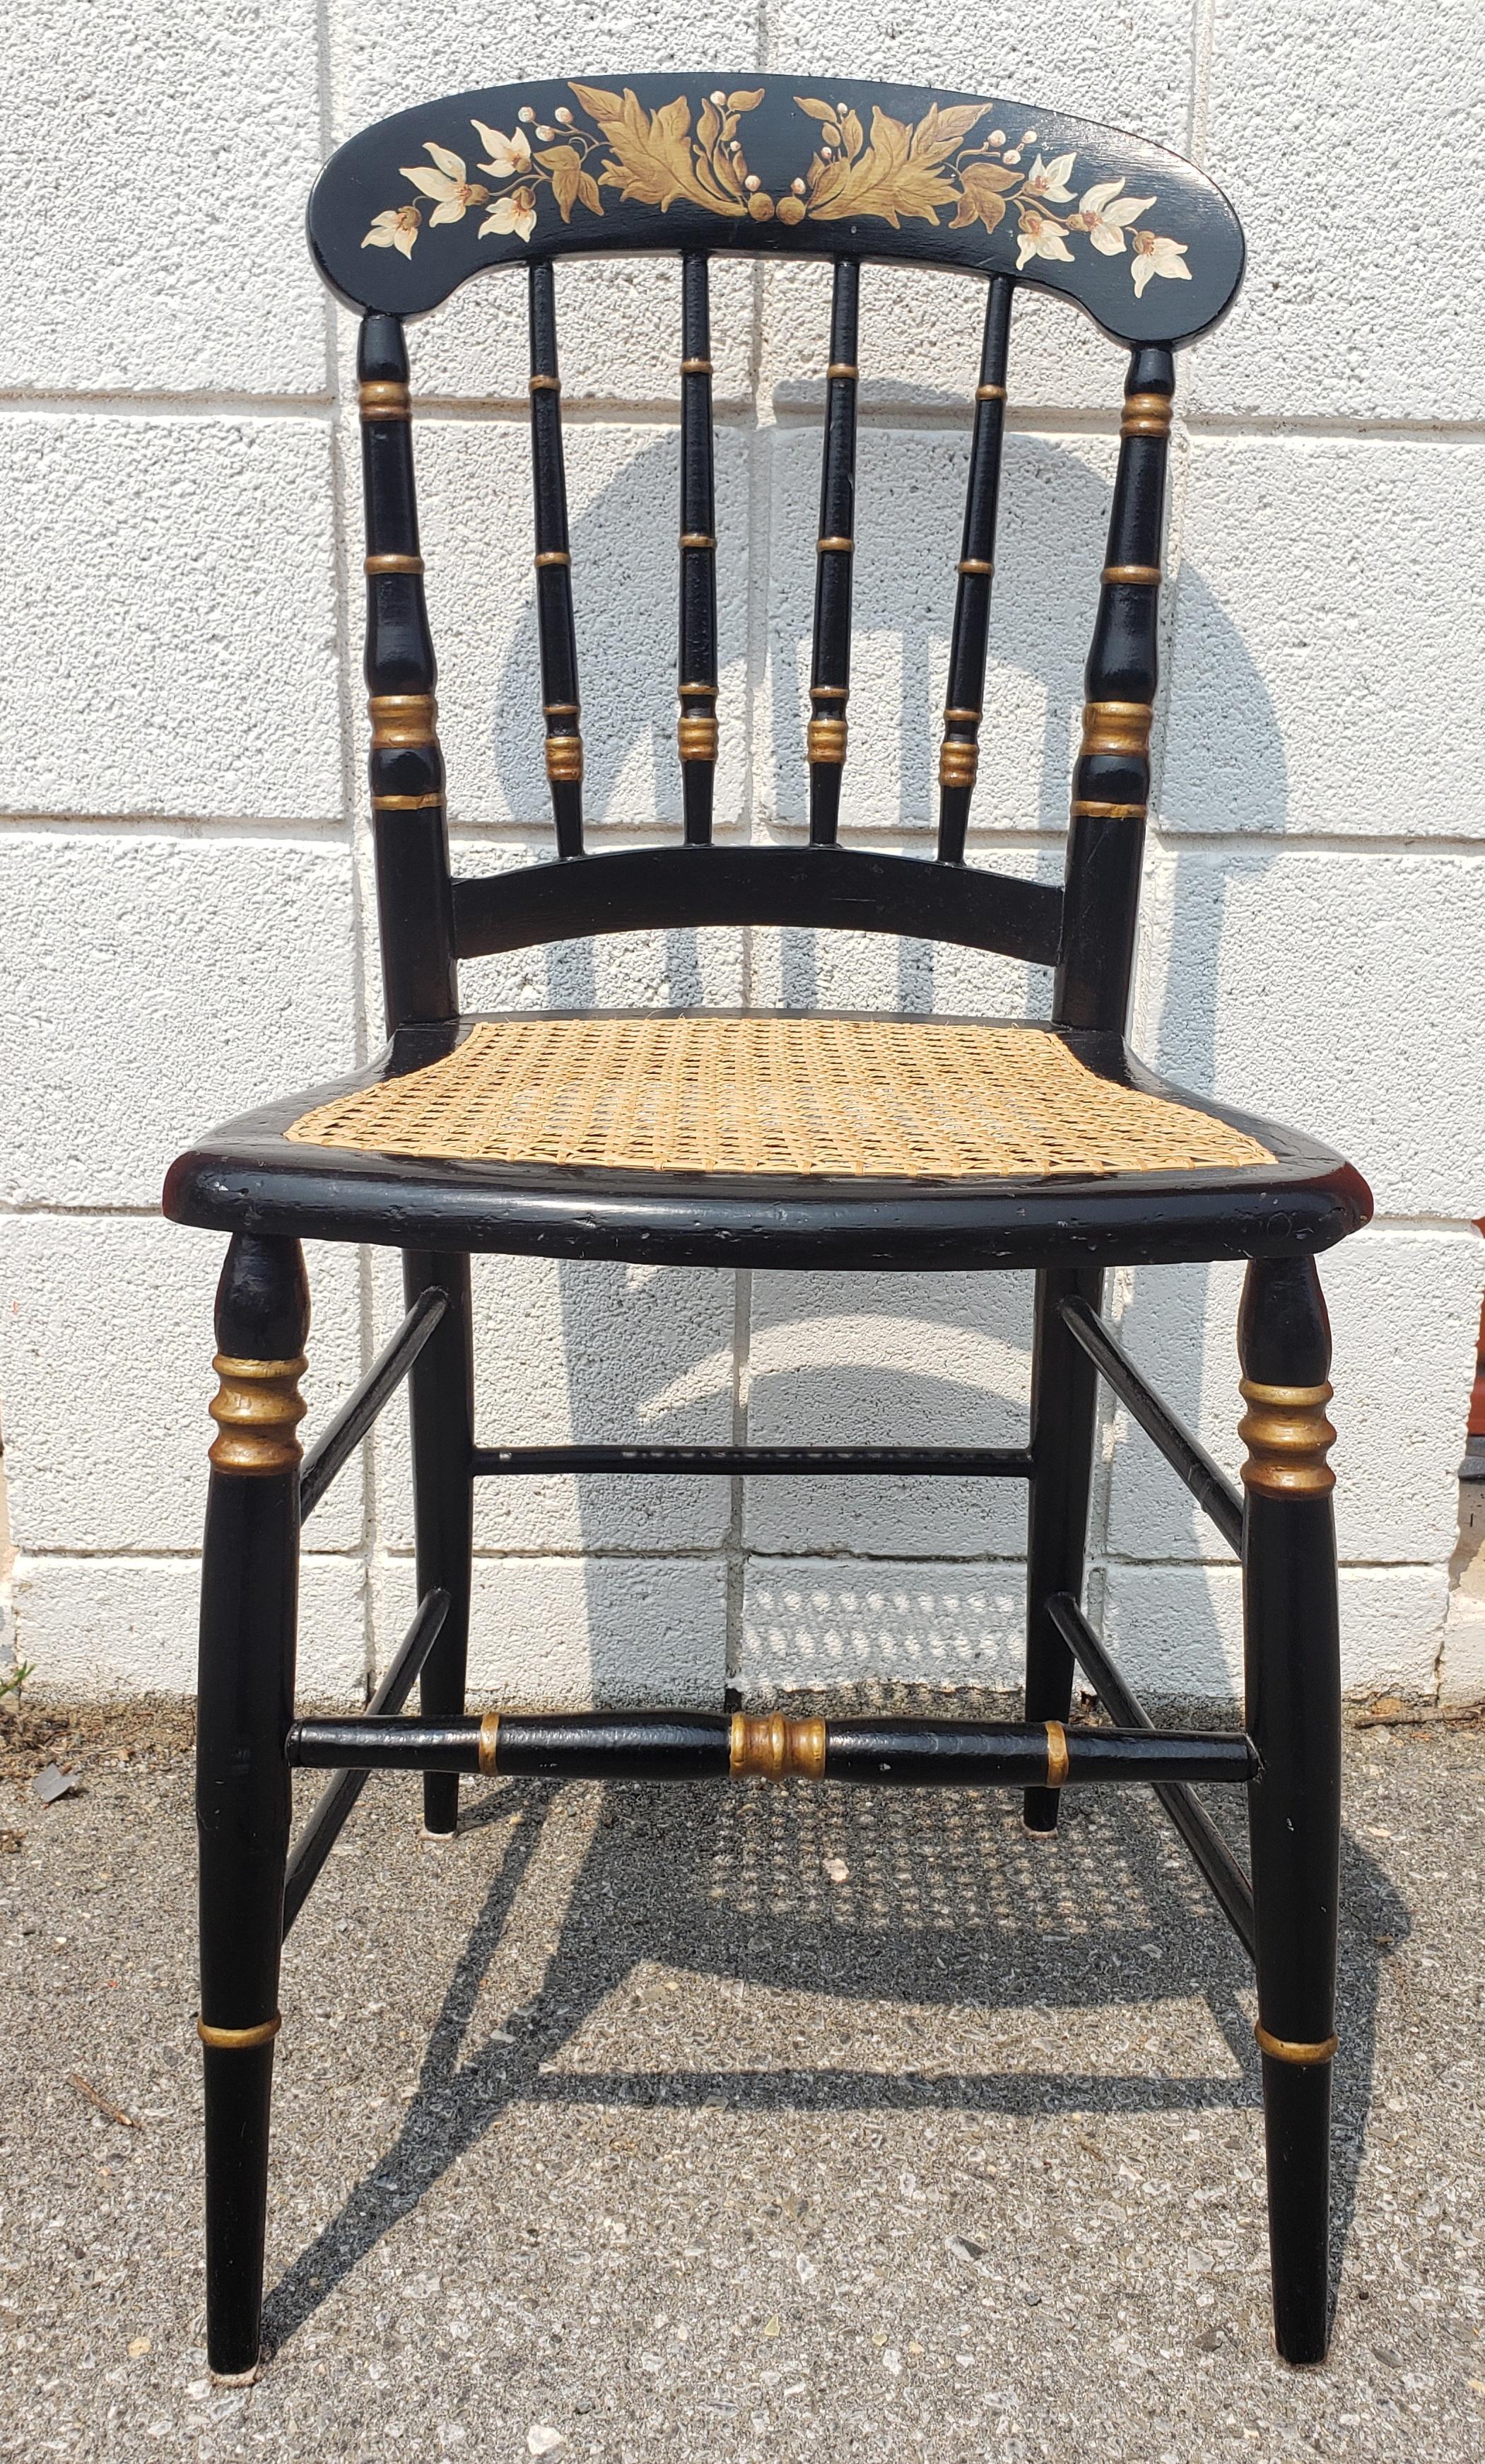 A completely refinished Late 19th century Ebonized and Parcel Gilt and hand decorated Cane Seat Side Chair.
Very sturdy and will last the next few decades.